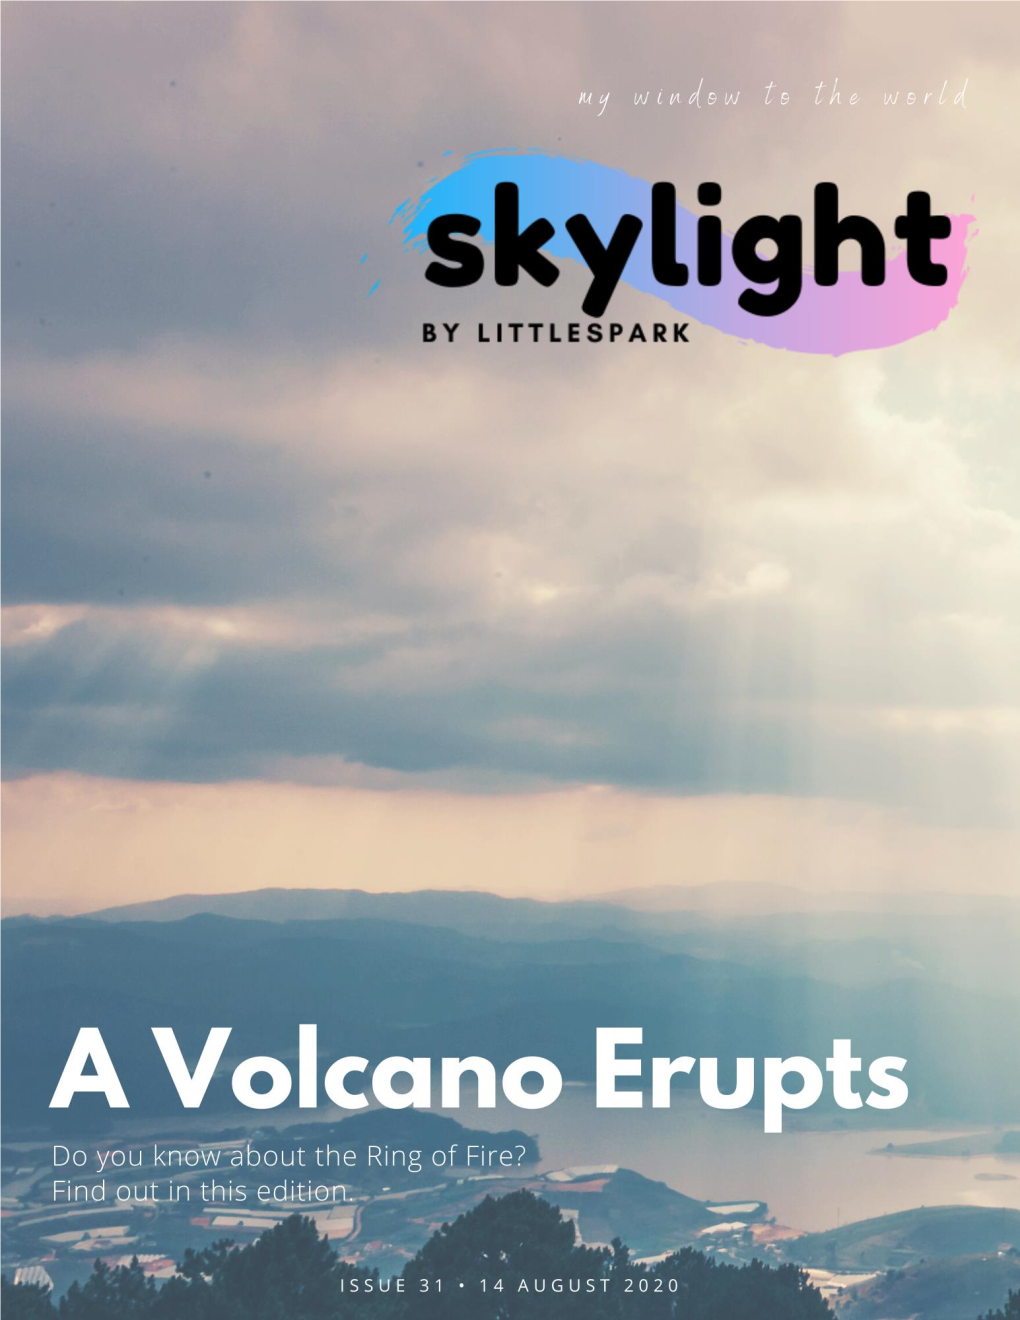 Skylight Will Be Sent to Your Inbox Each Week Dear Readers, Or Directly to Your Phone Via Whatsapp Whichever Mode You Prefer